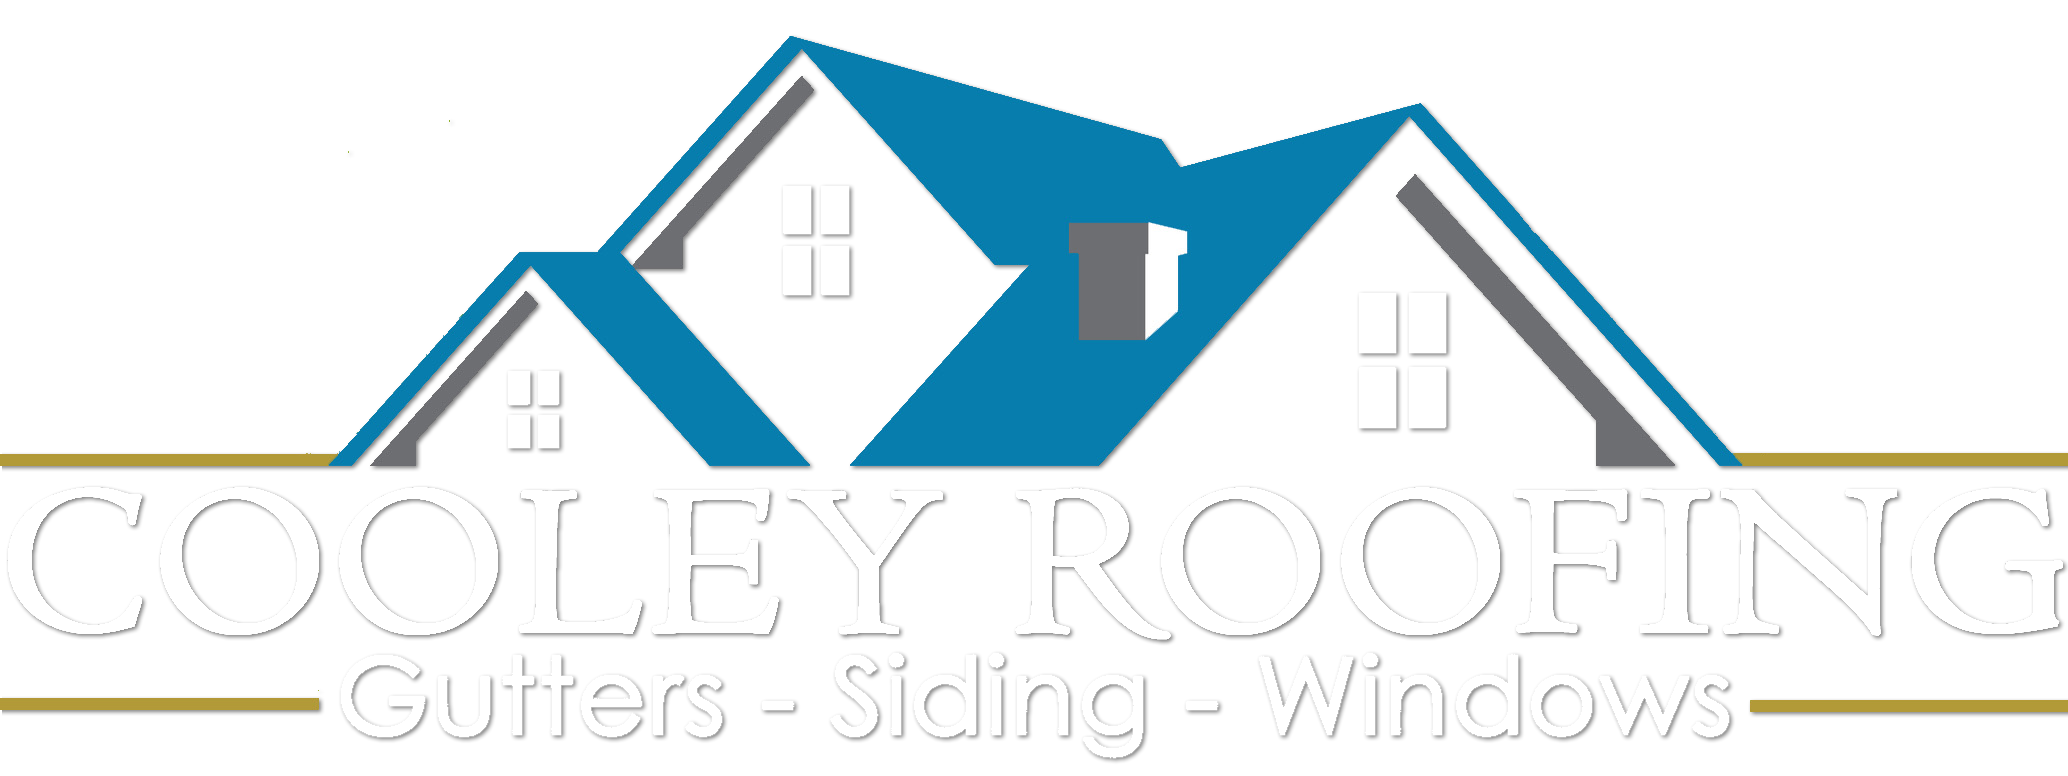 Cooley Roofing White Logo